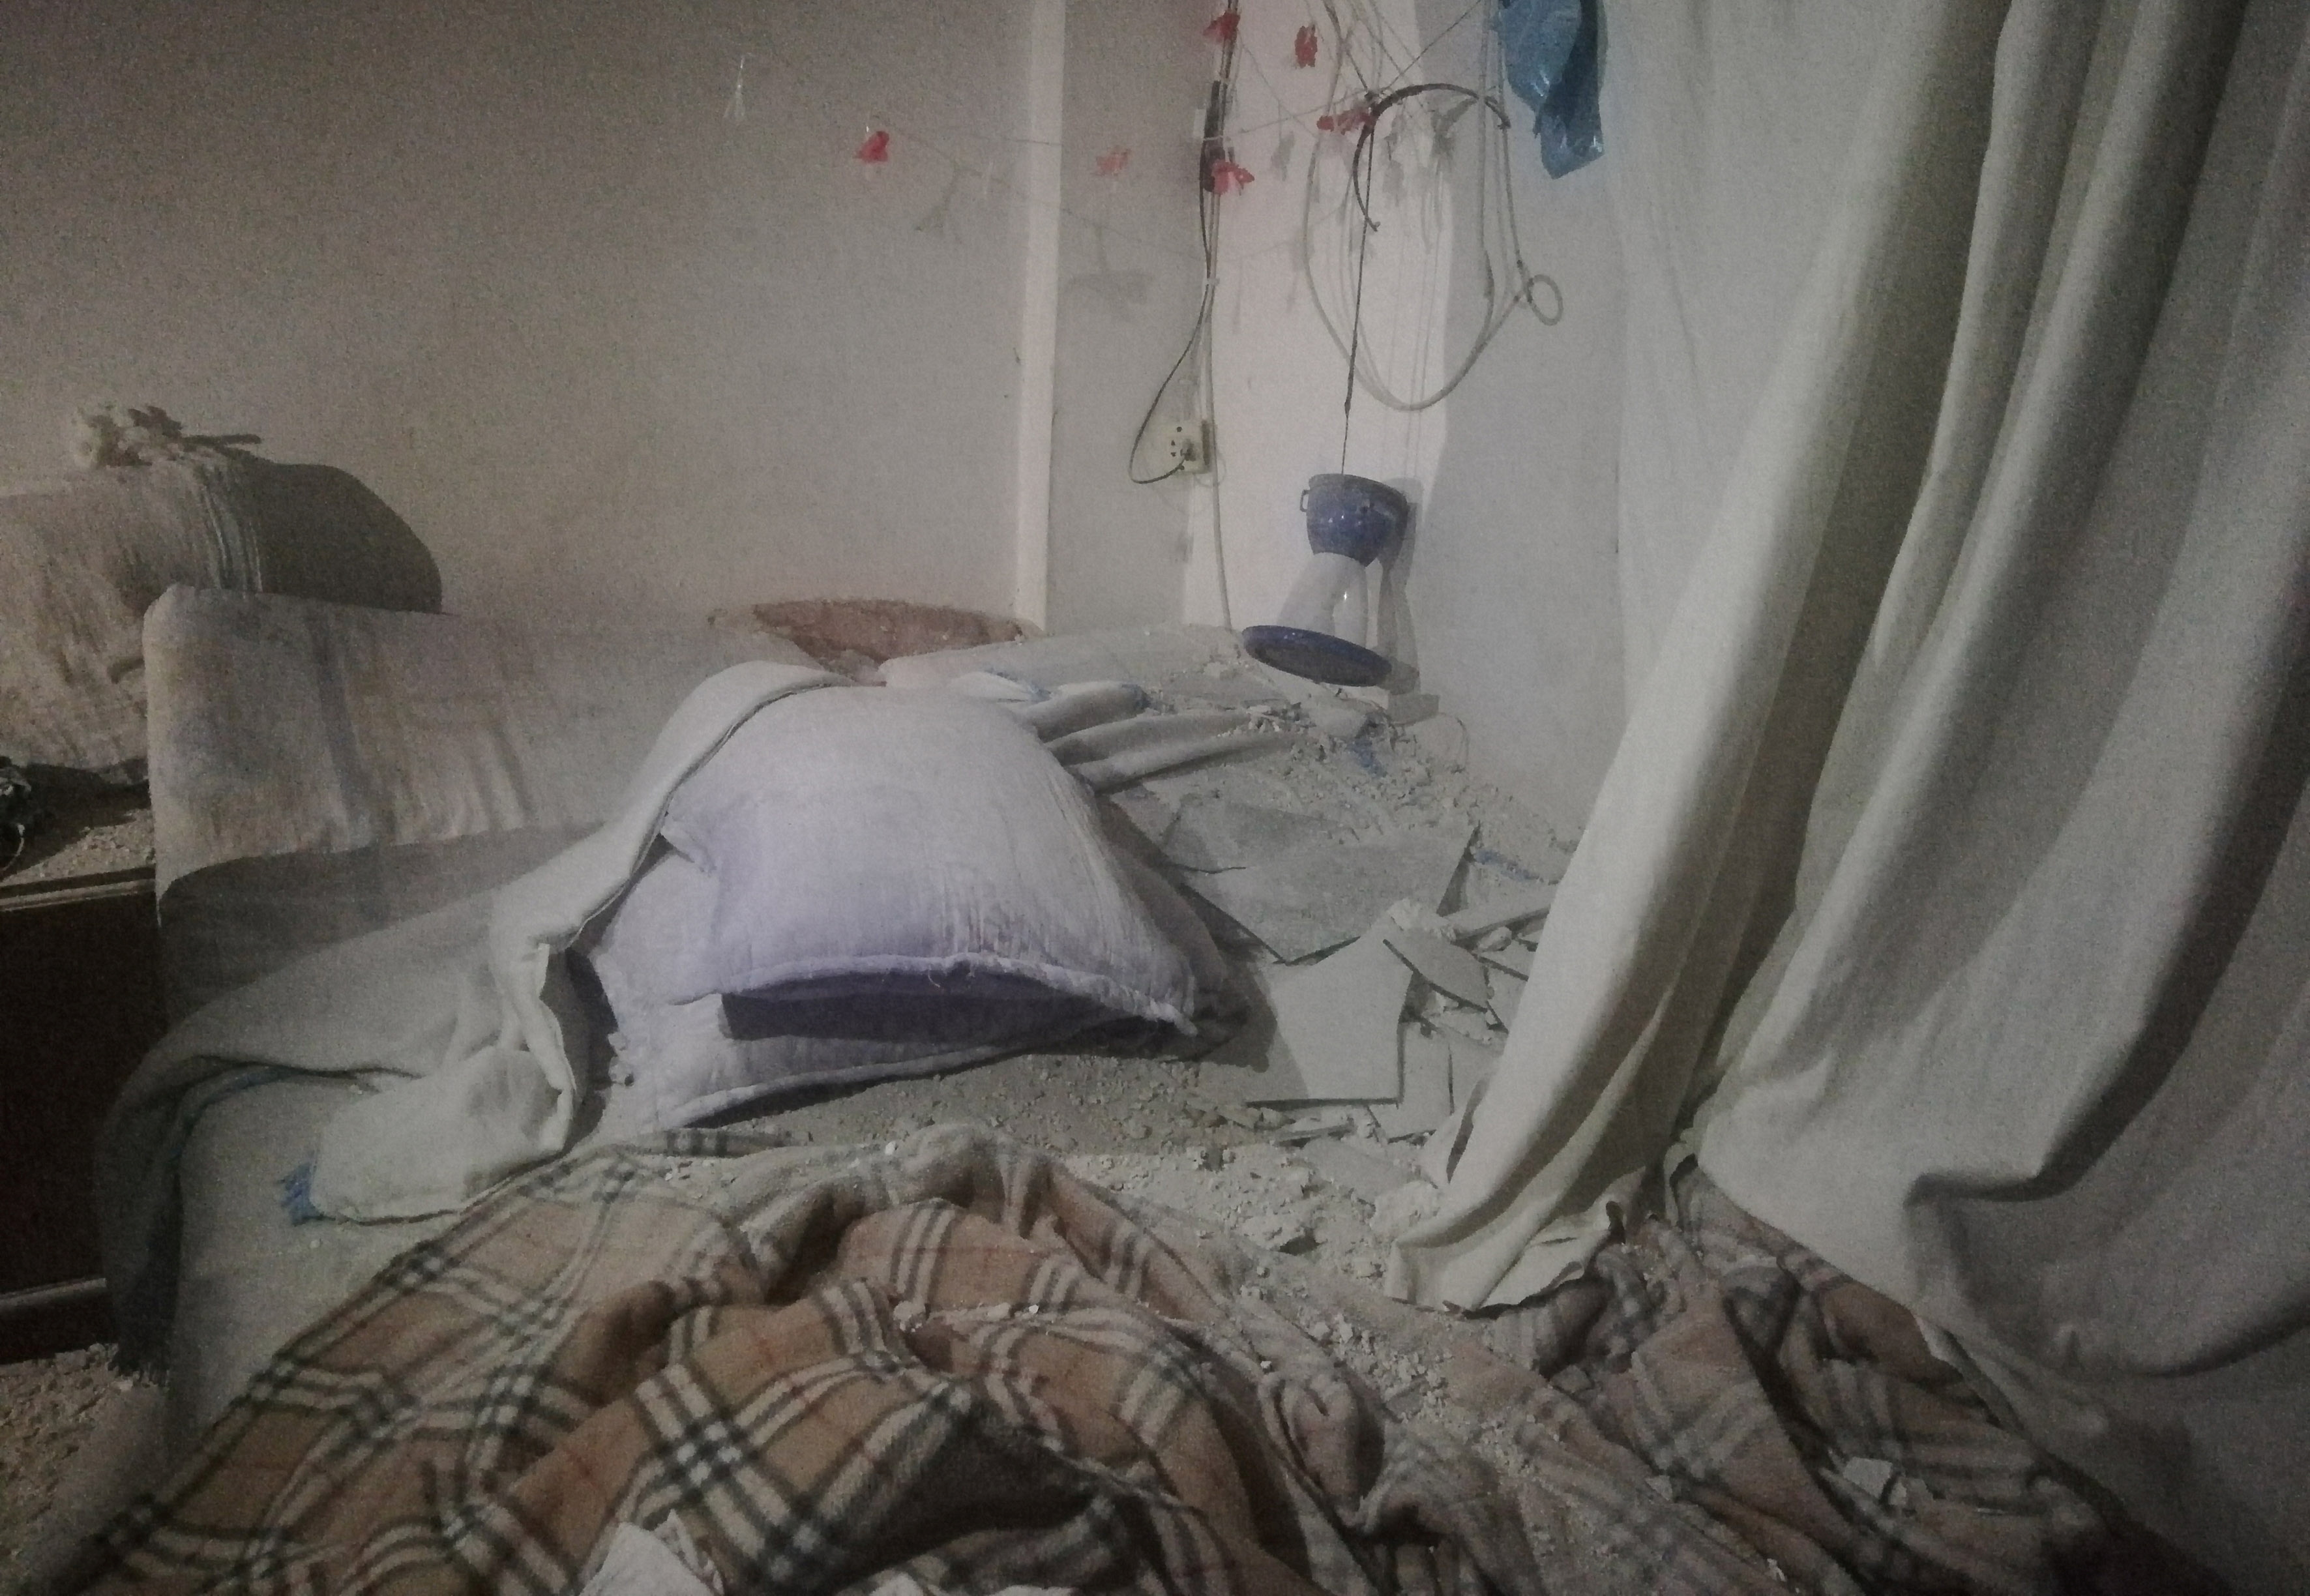 A view shows the damage inside a room after pre-dawn raids on the Mediterranean port region of Latakia